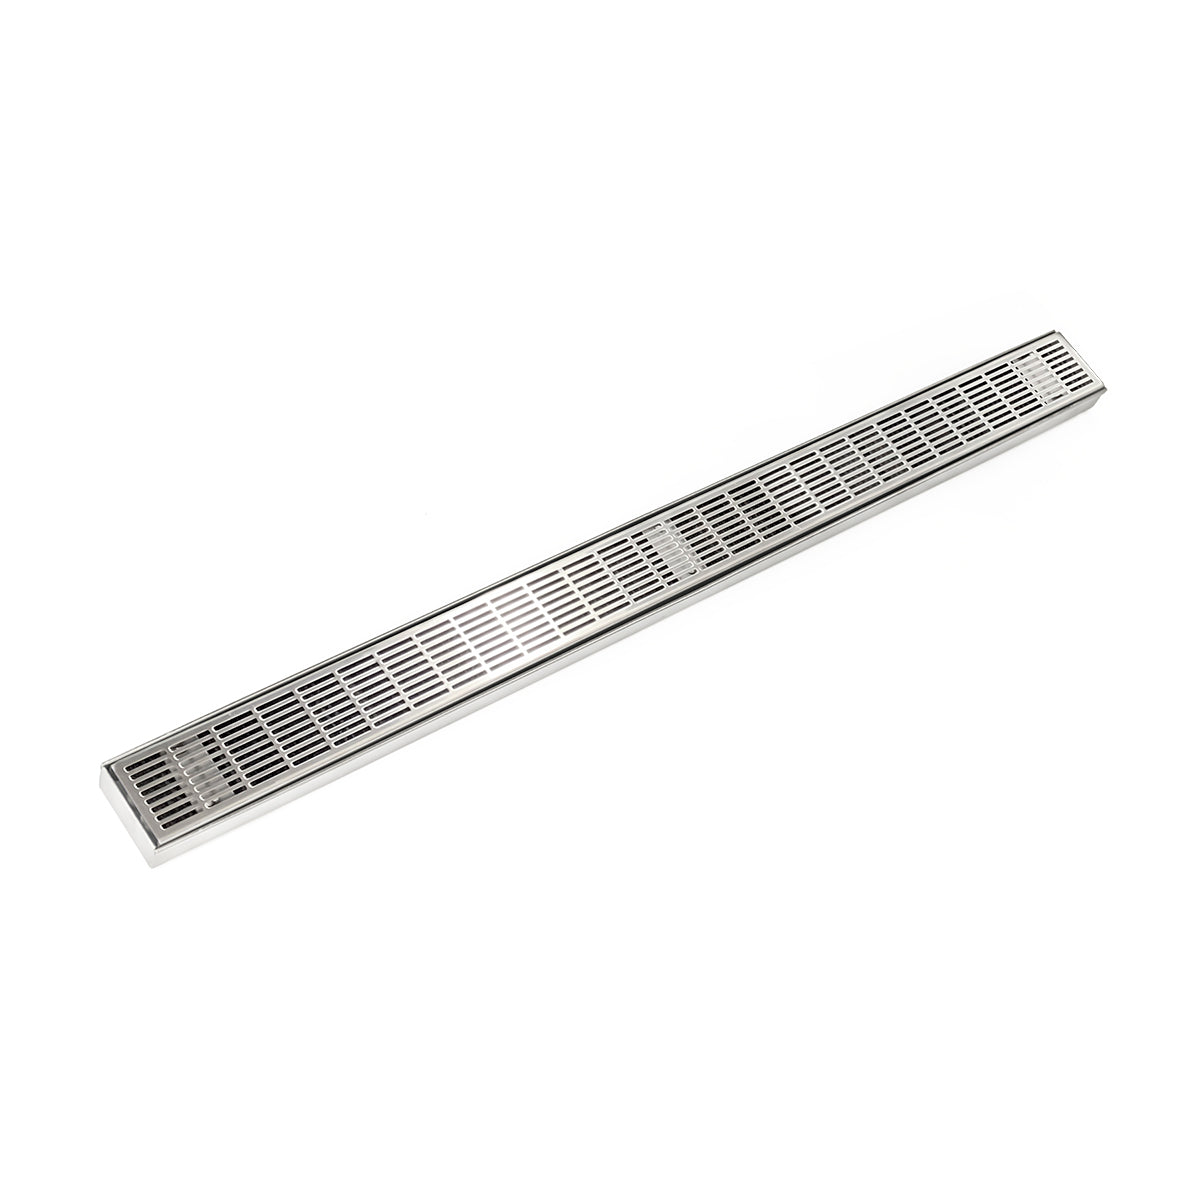 Infinity Drain 60" FX Series Fixed Length Linear Drain Kit with Perforated Slotted Grate